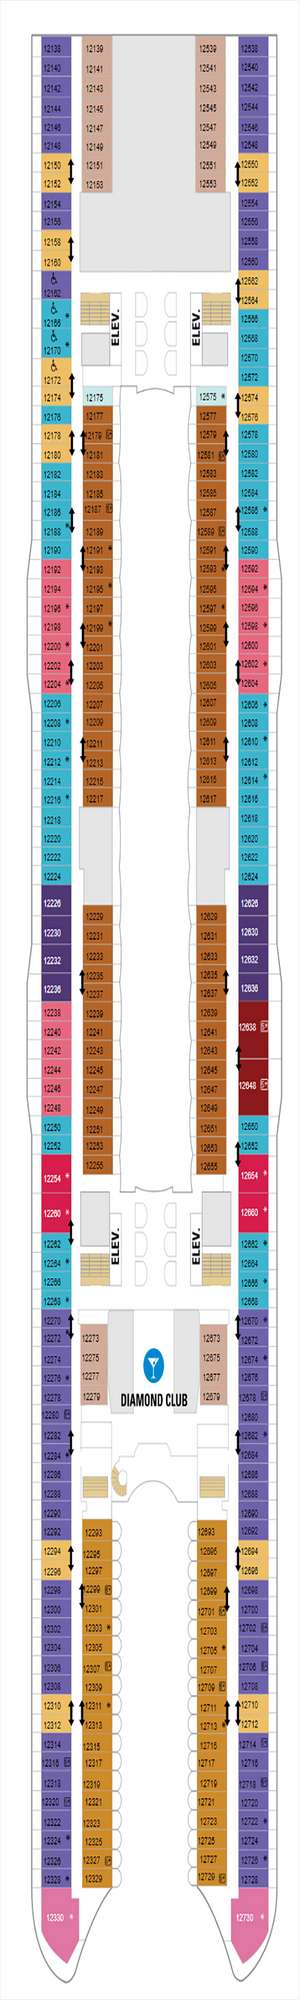 Deck plan for Allure of the Seas